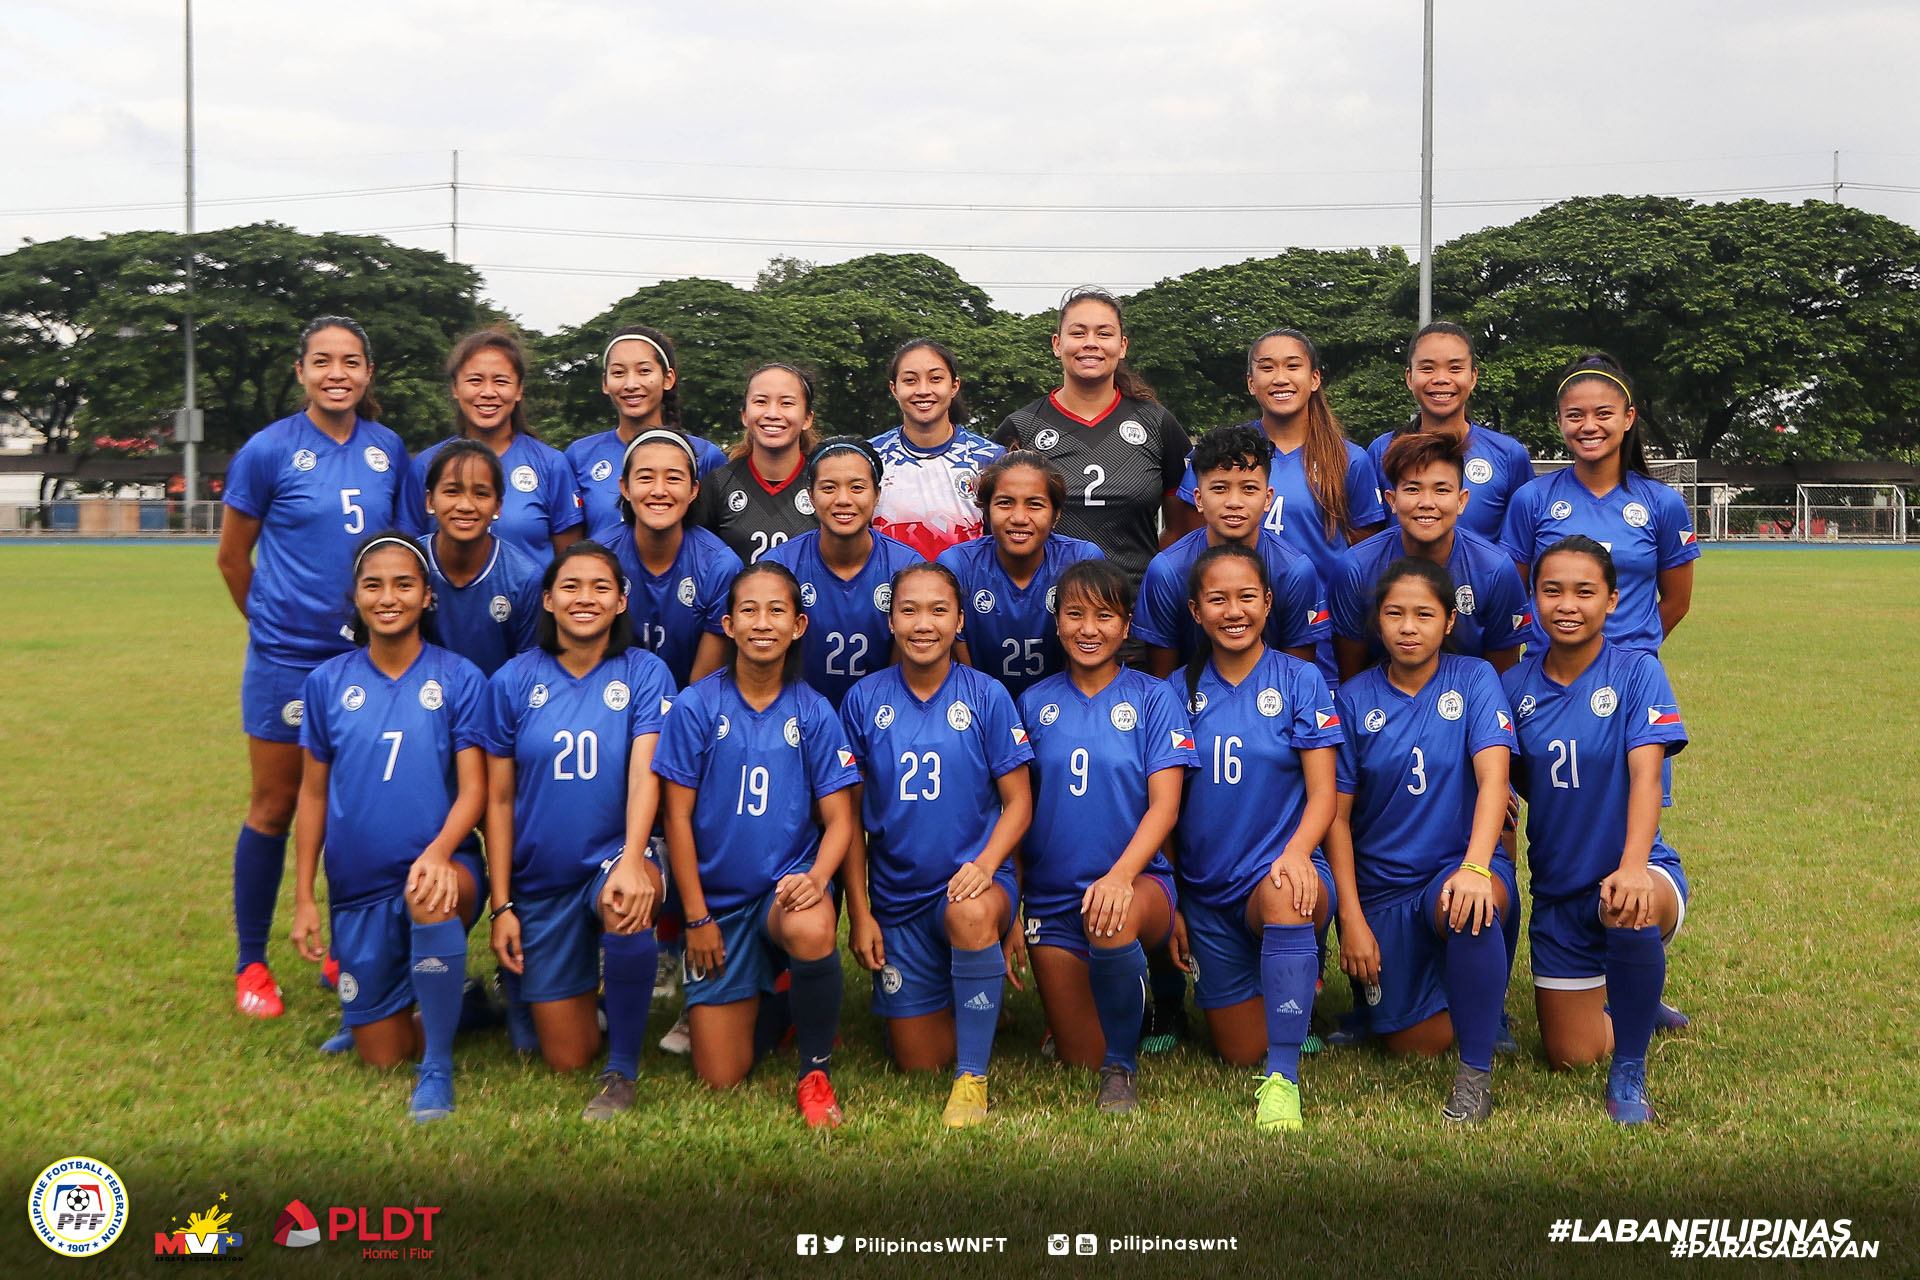 Two games in, 10 goals scored for the relentless Philippine Women’s